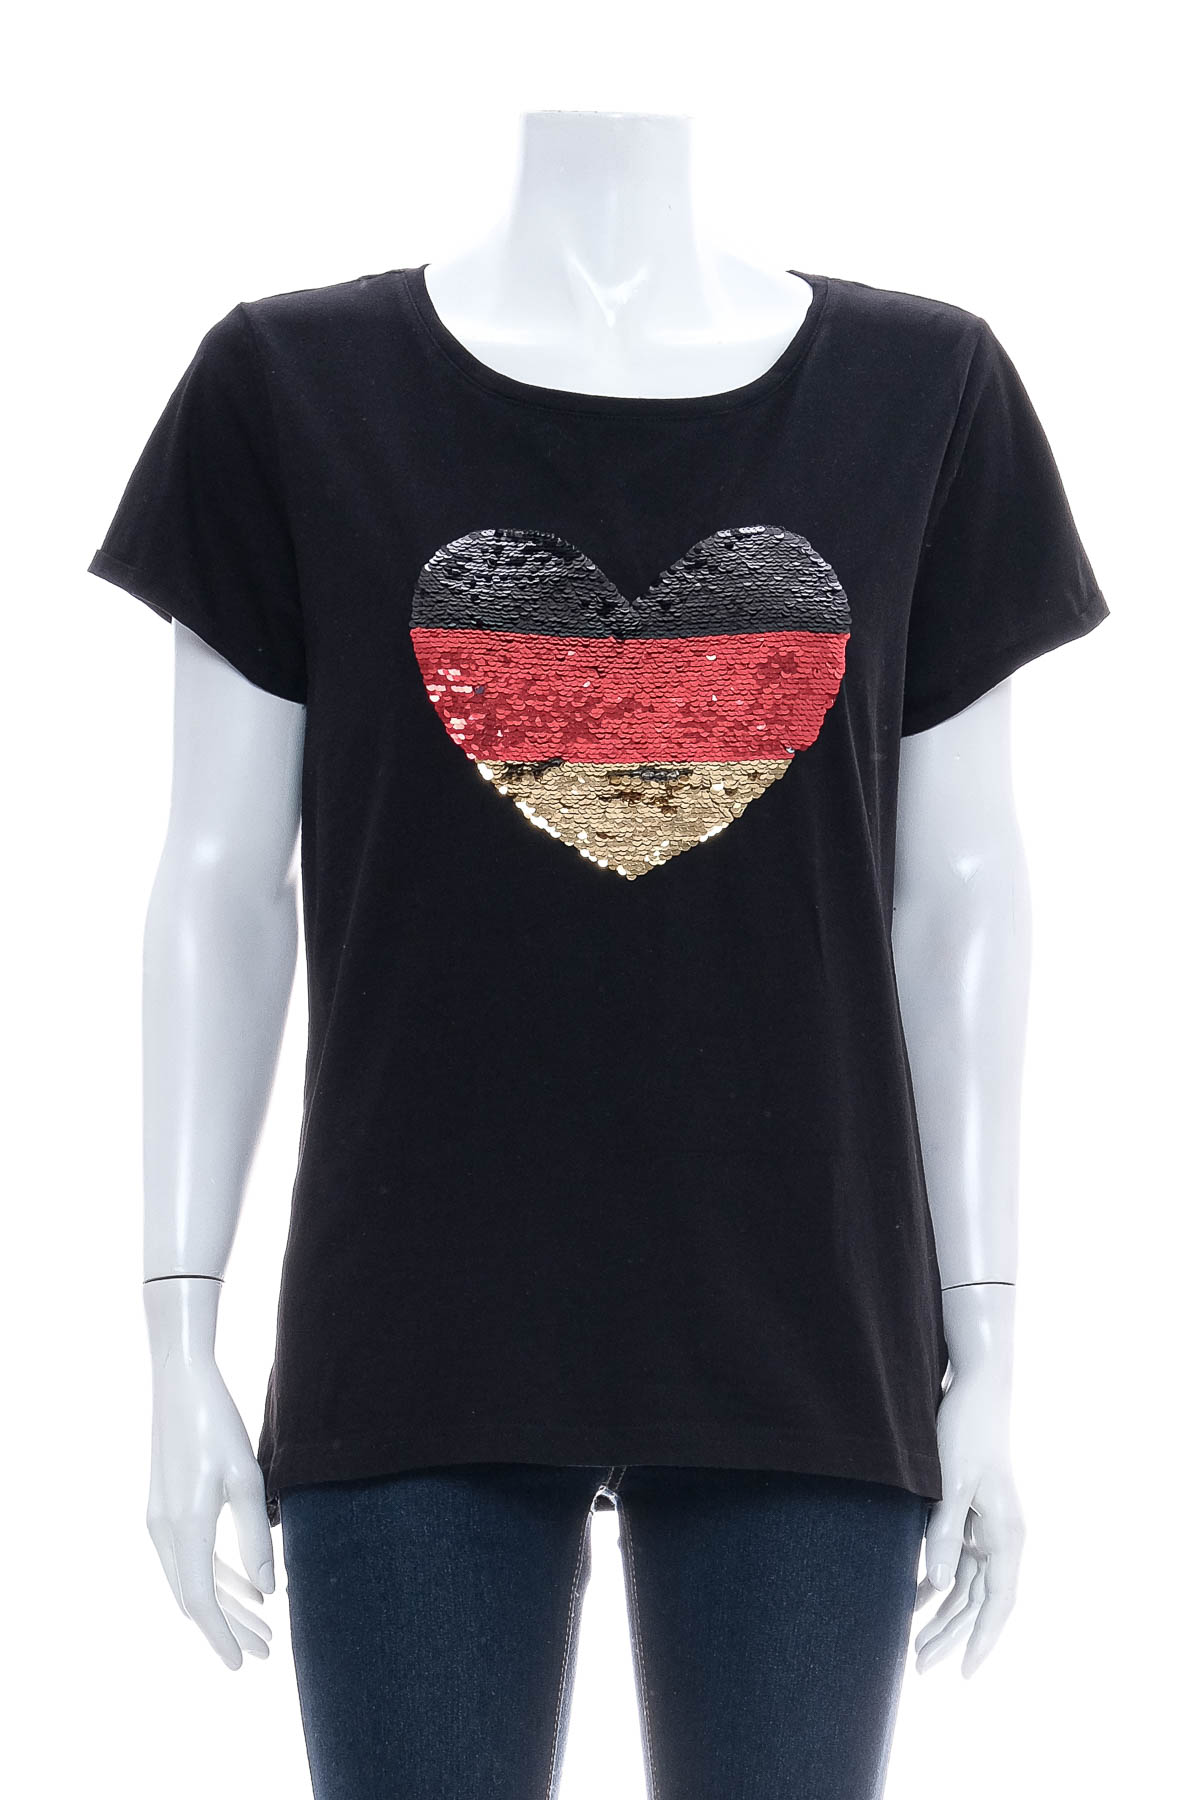 Women's t-shirt - Colours of the world - 0